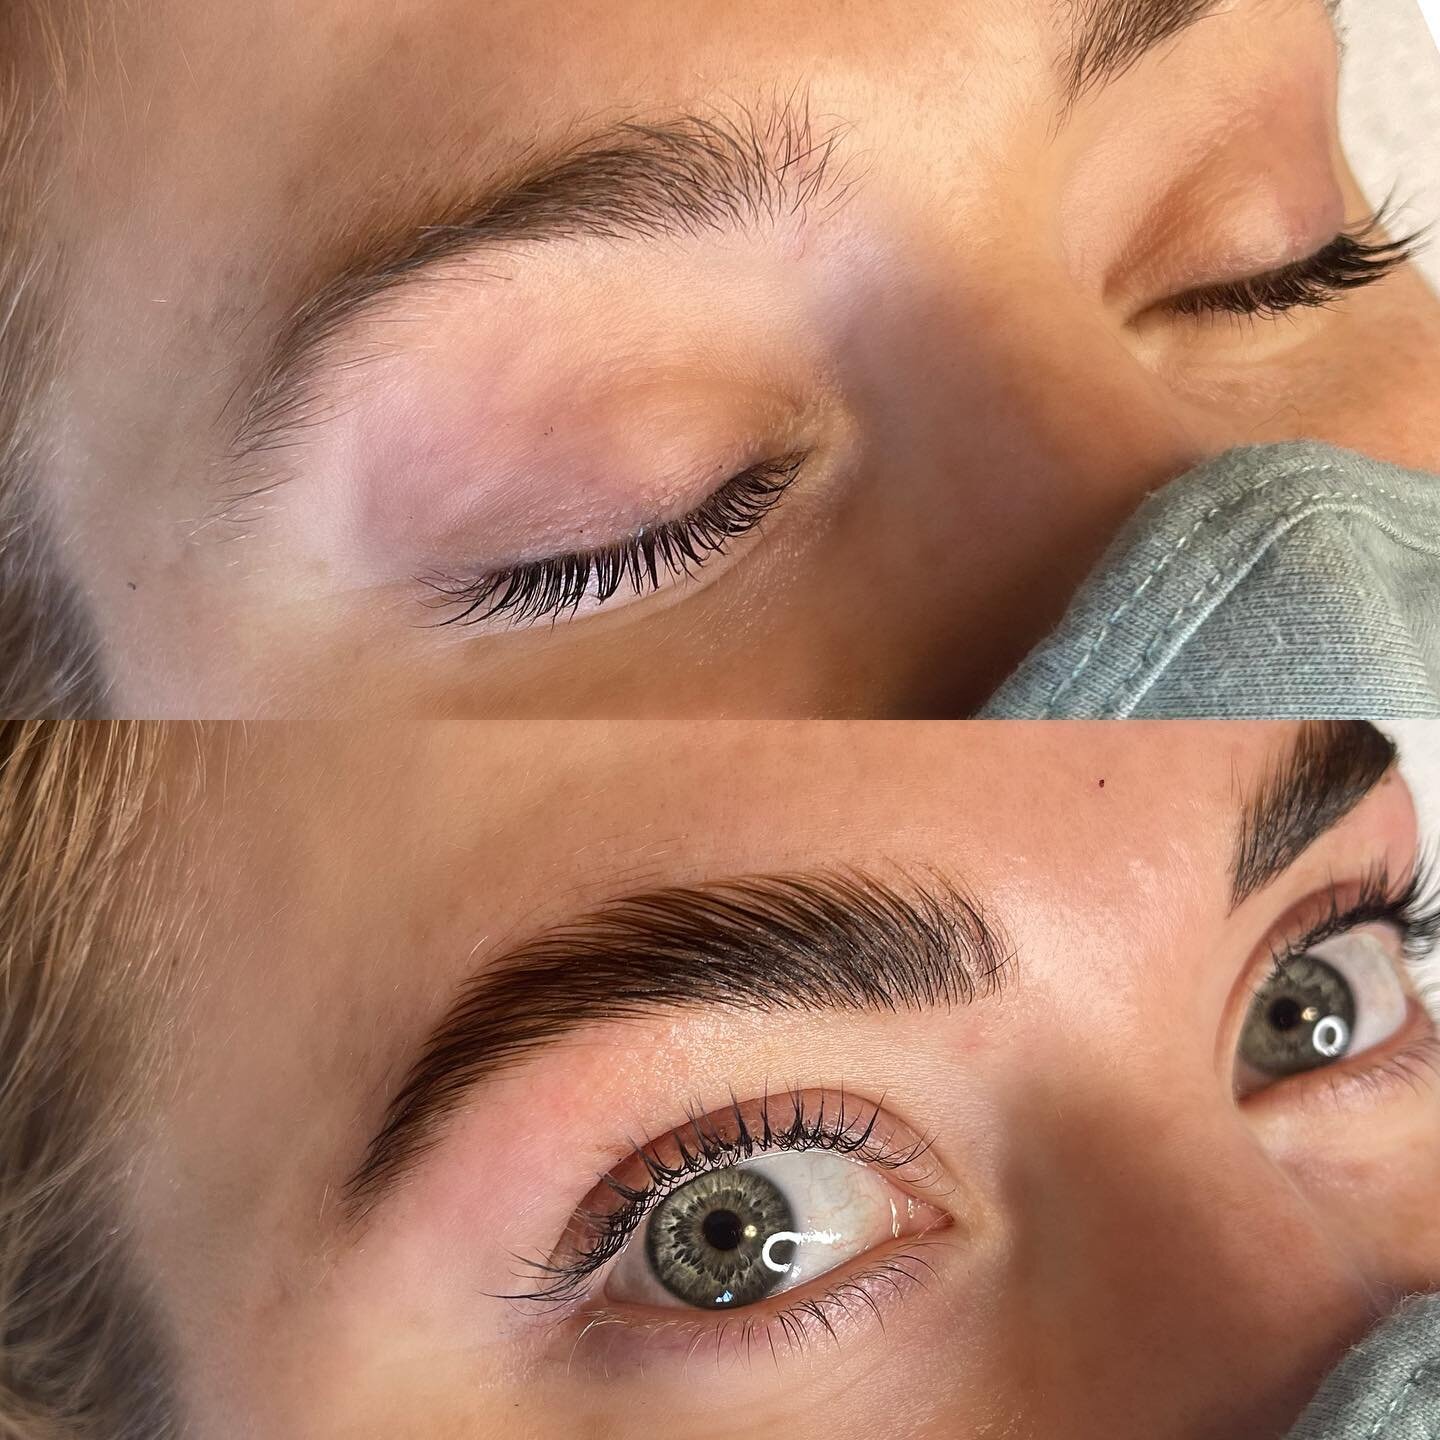 BROW ENVY 😍🔥 Brow Lamination is the way to achieve natural &amp;  fluffy brows. Low maintenance and lasts 6-8 weeks. 
Follow the Link in my BIO to book! 
.
.
.
.
.
 #fluffybrows #kitchenermicroblading #waterloomicroblading #microbladingwaterloo #mi